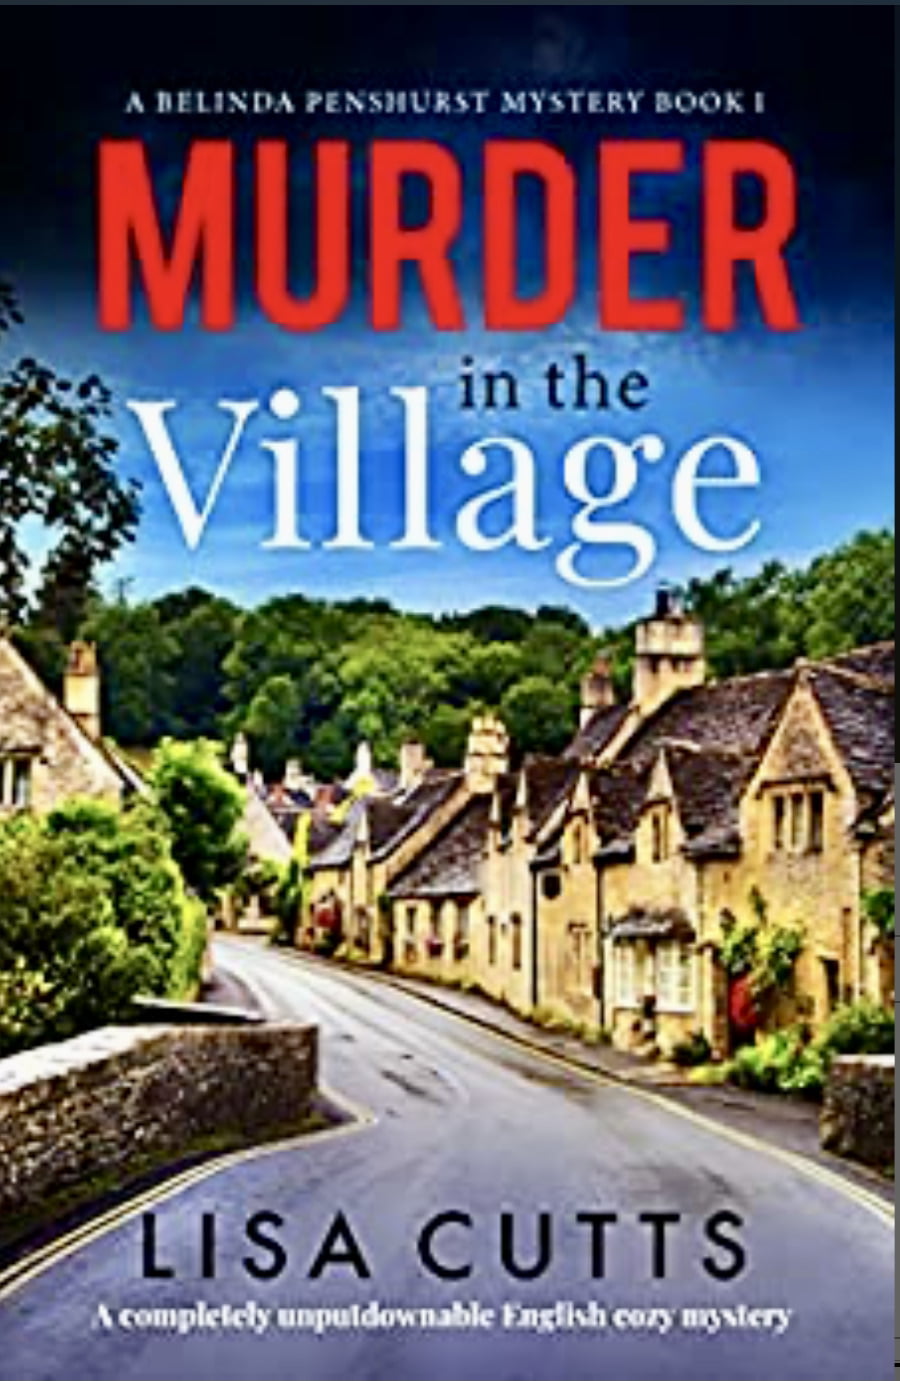 MURDER IN THE VILLAGE BY LISA CUTTS – BOOK REVIEW